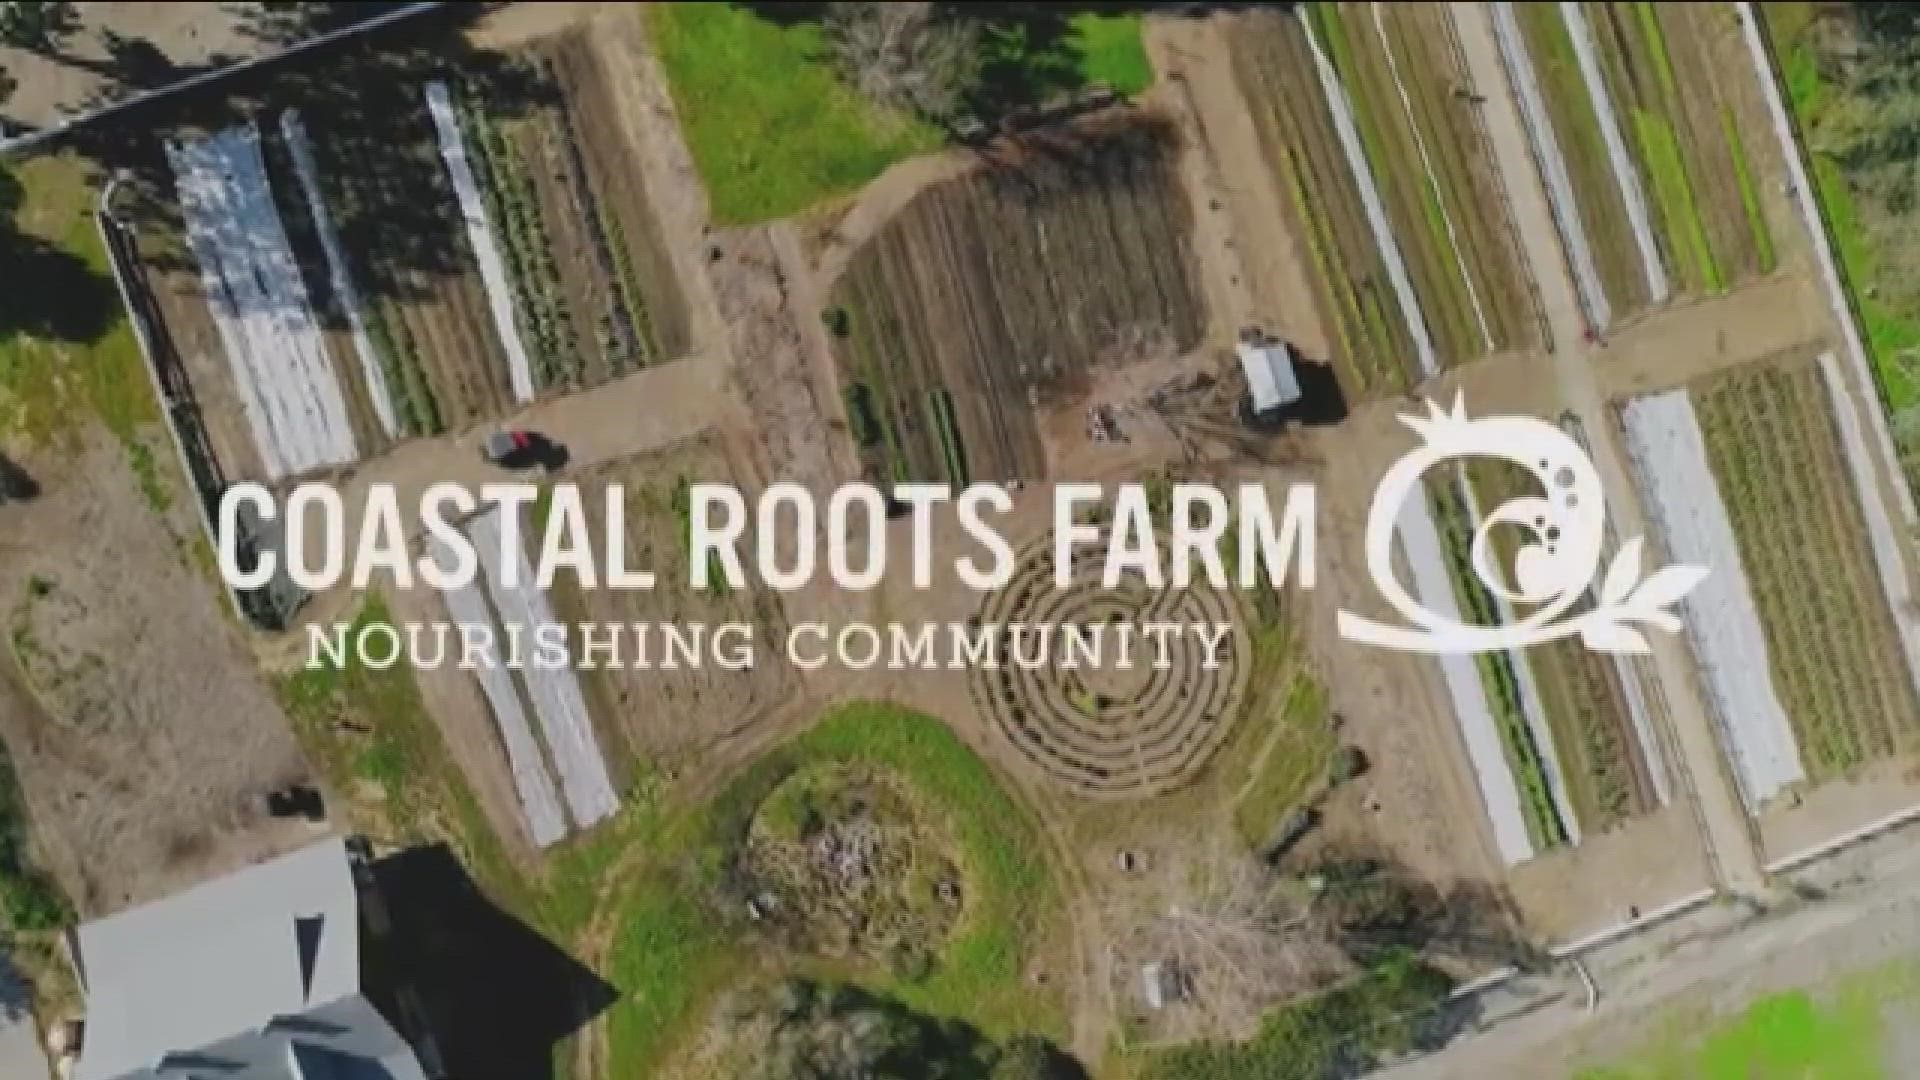 Coastal Roots Farm, a nonprofit Jewish community farm and education center in Encinitas, welcomes community members from all backgrounds to celebrate Tu B’Shvat.